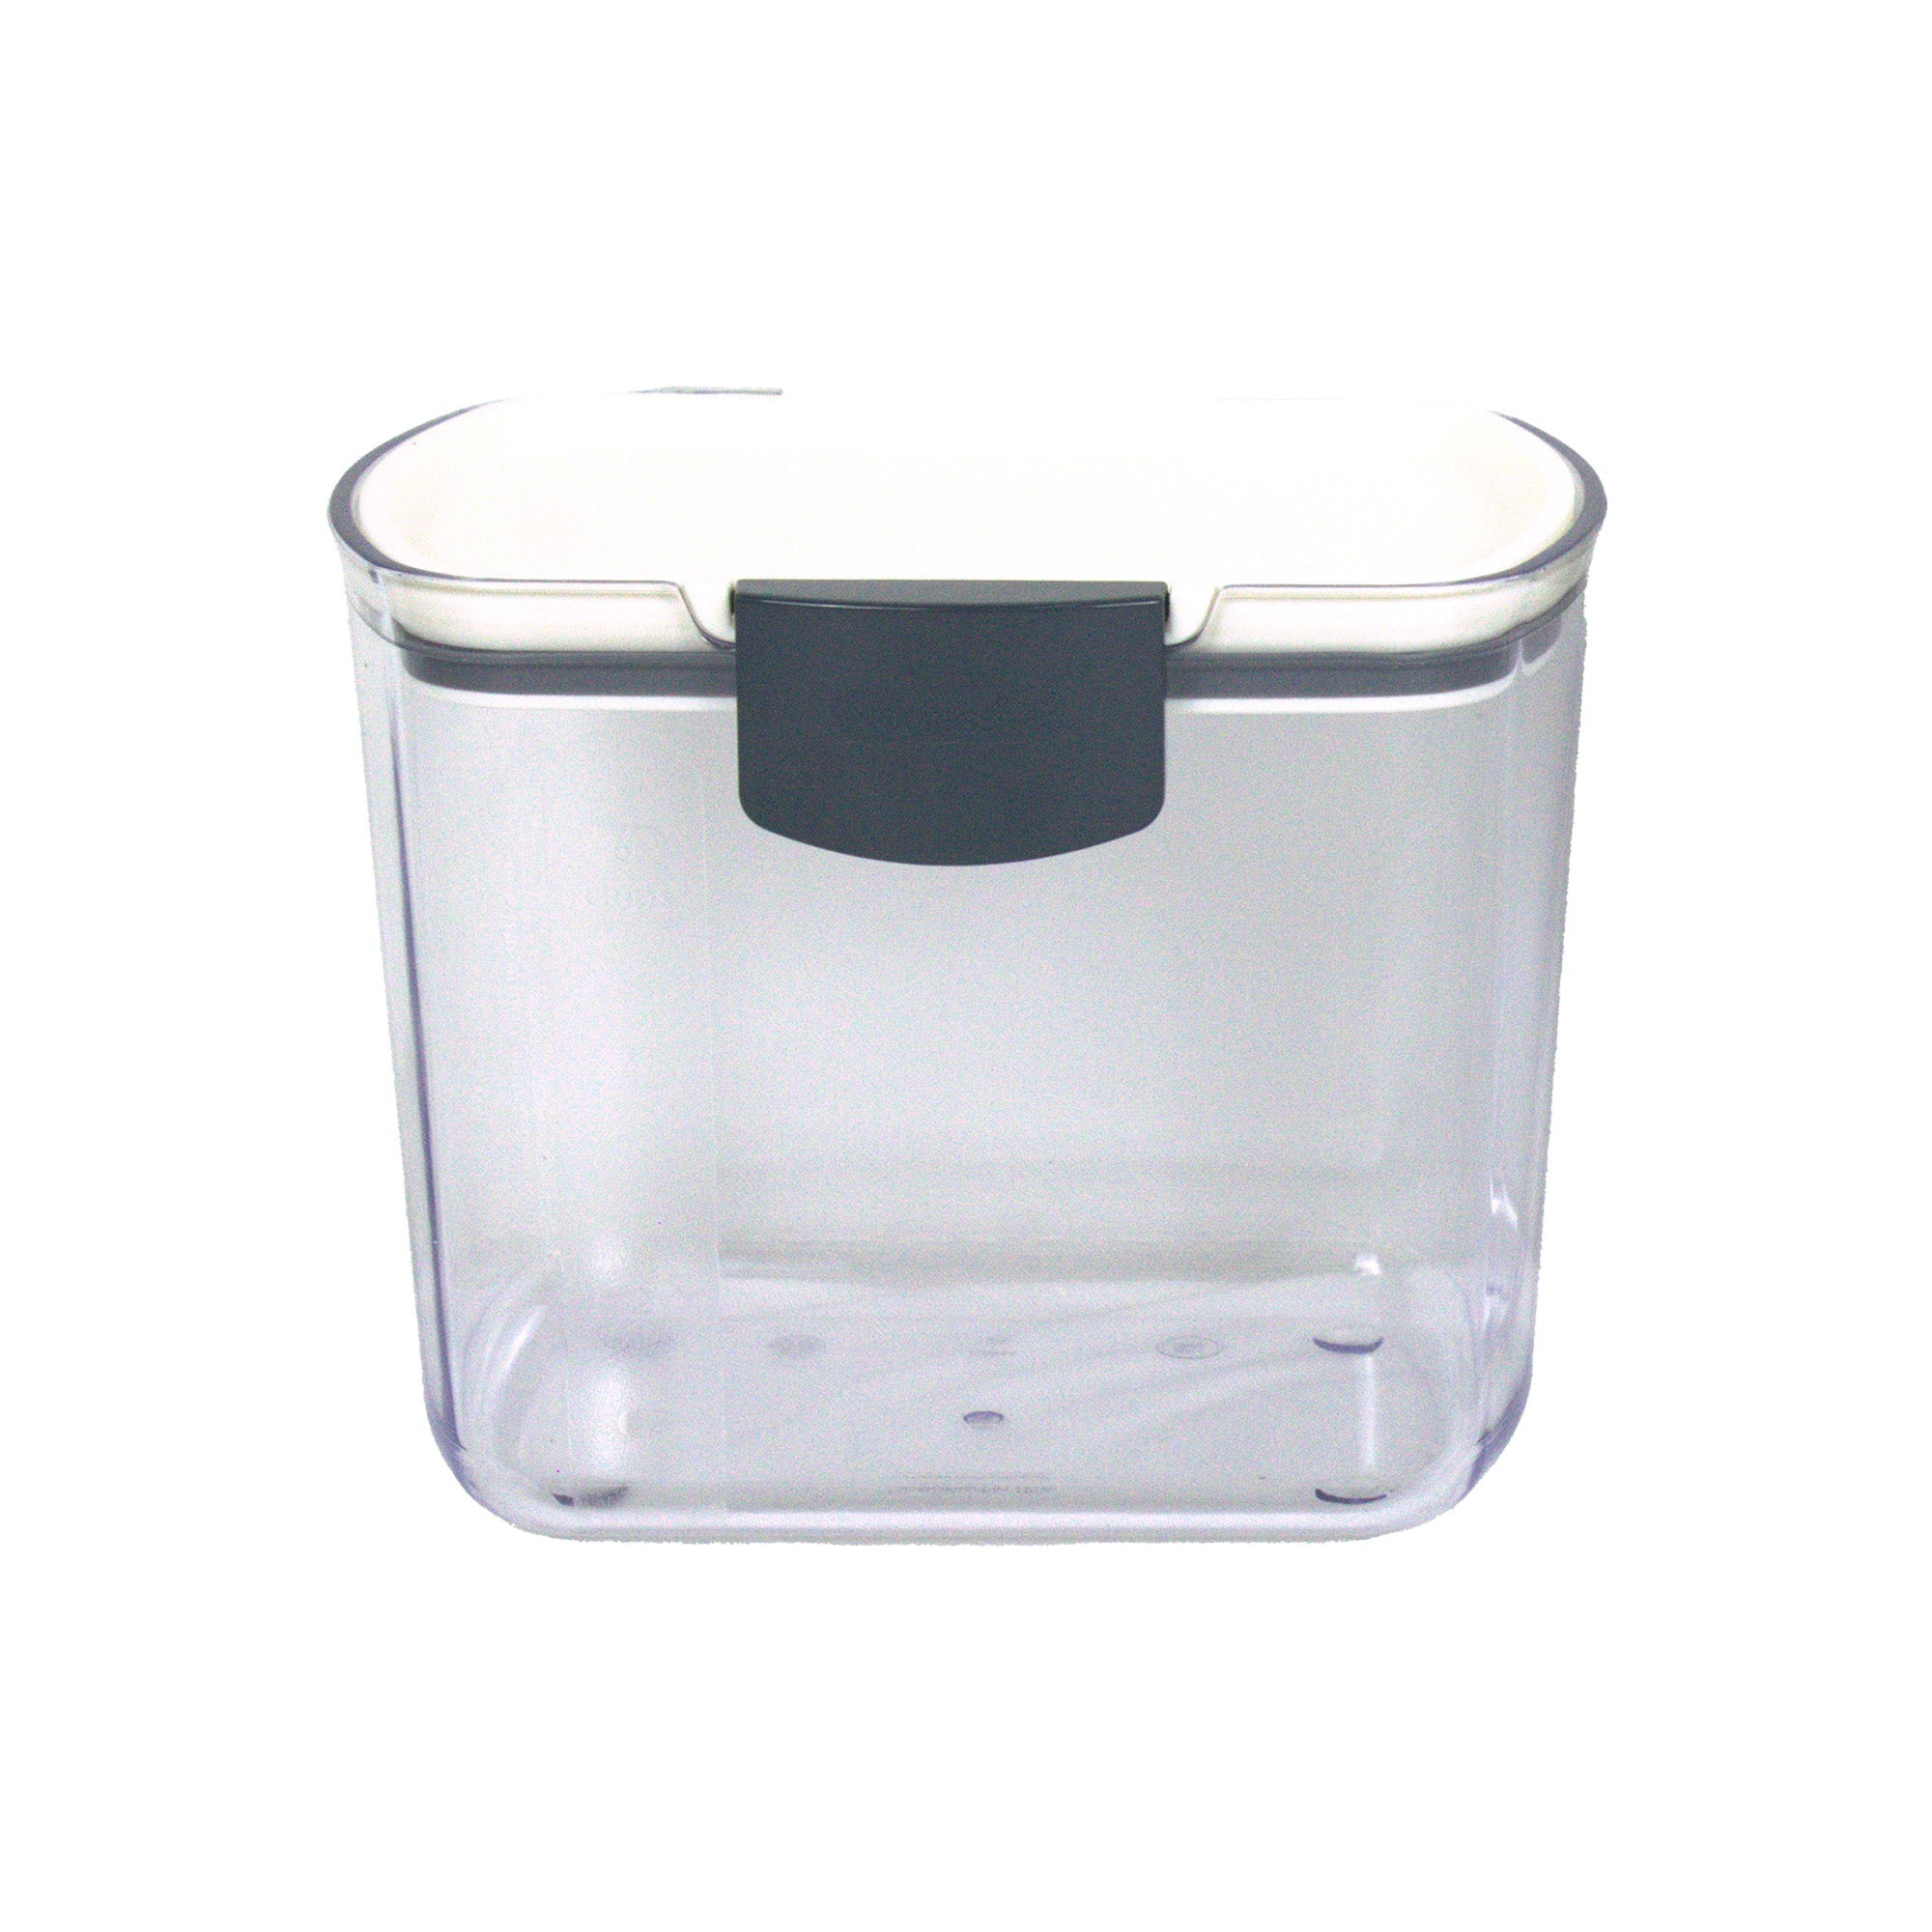 1 Plastic container with a lid for the IonizeMe Maxx 5 Array